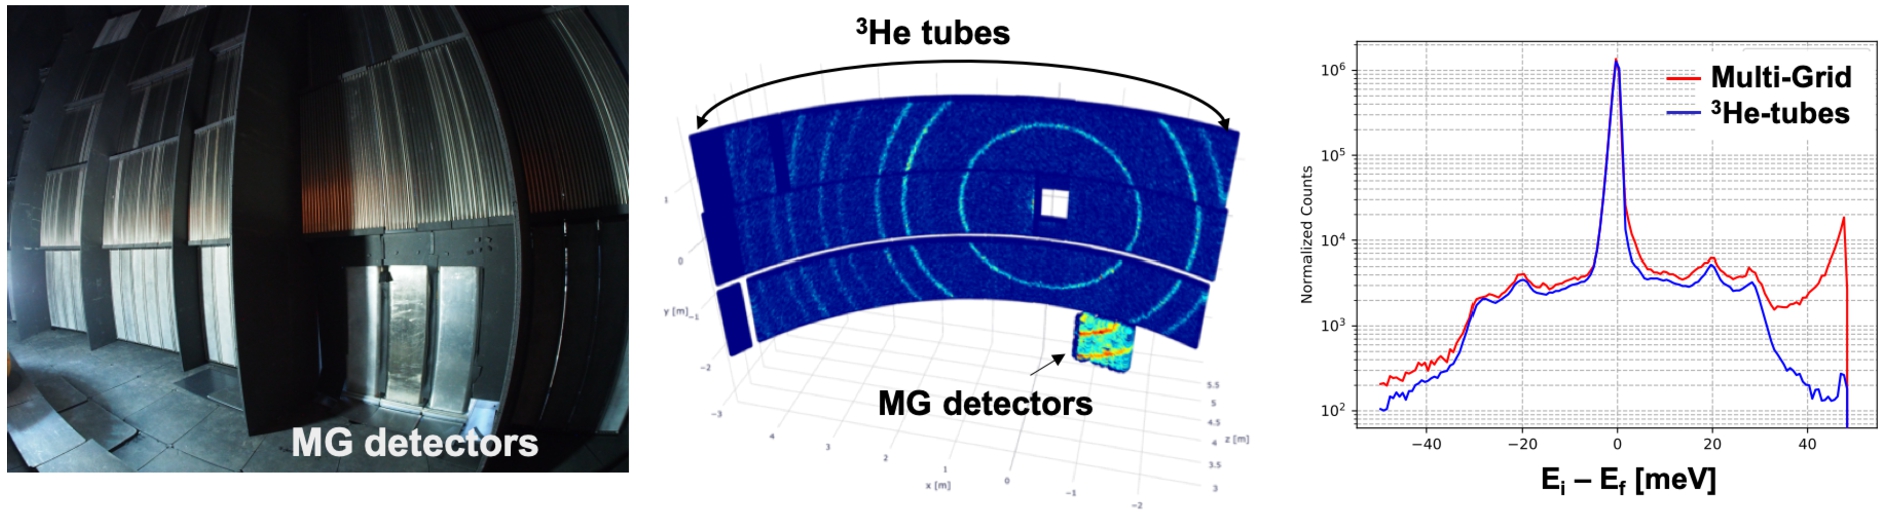 Left: Photograph taken during the testing of the three Multi-Grid prototypes at the SEQUOIA instrument at SNS. Middle: Plot showing a 3D-histogram of neutron hit positions from white beam measurement on Si-powder. Note that the color scale for the 3He-tubes and the Multi-Grid detectors are different. Right: Comparison of the Multi-Grid (red) and 3He-tubes (blue) energy transfer data collected with a vanadium sample at 50 meV. The elastic peak is centered at ΔE = 0. The Multi-Grid data contains the events recorded by all three detectors.